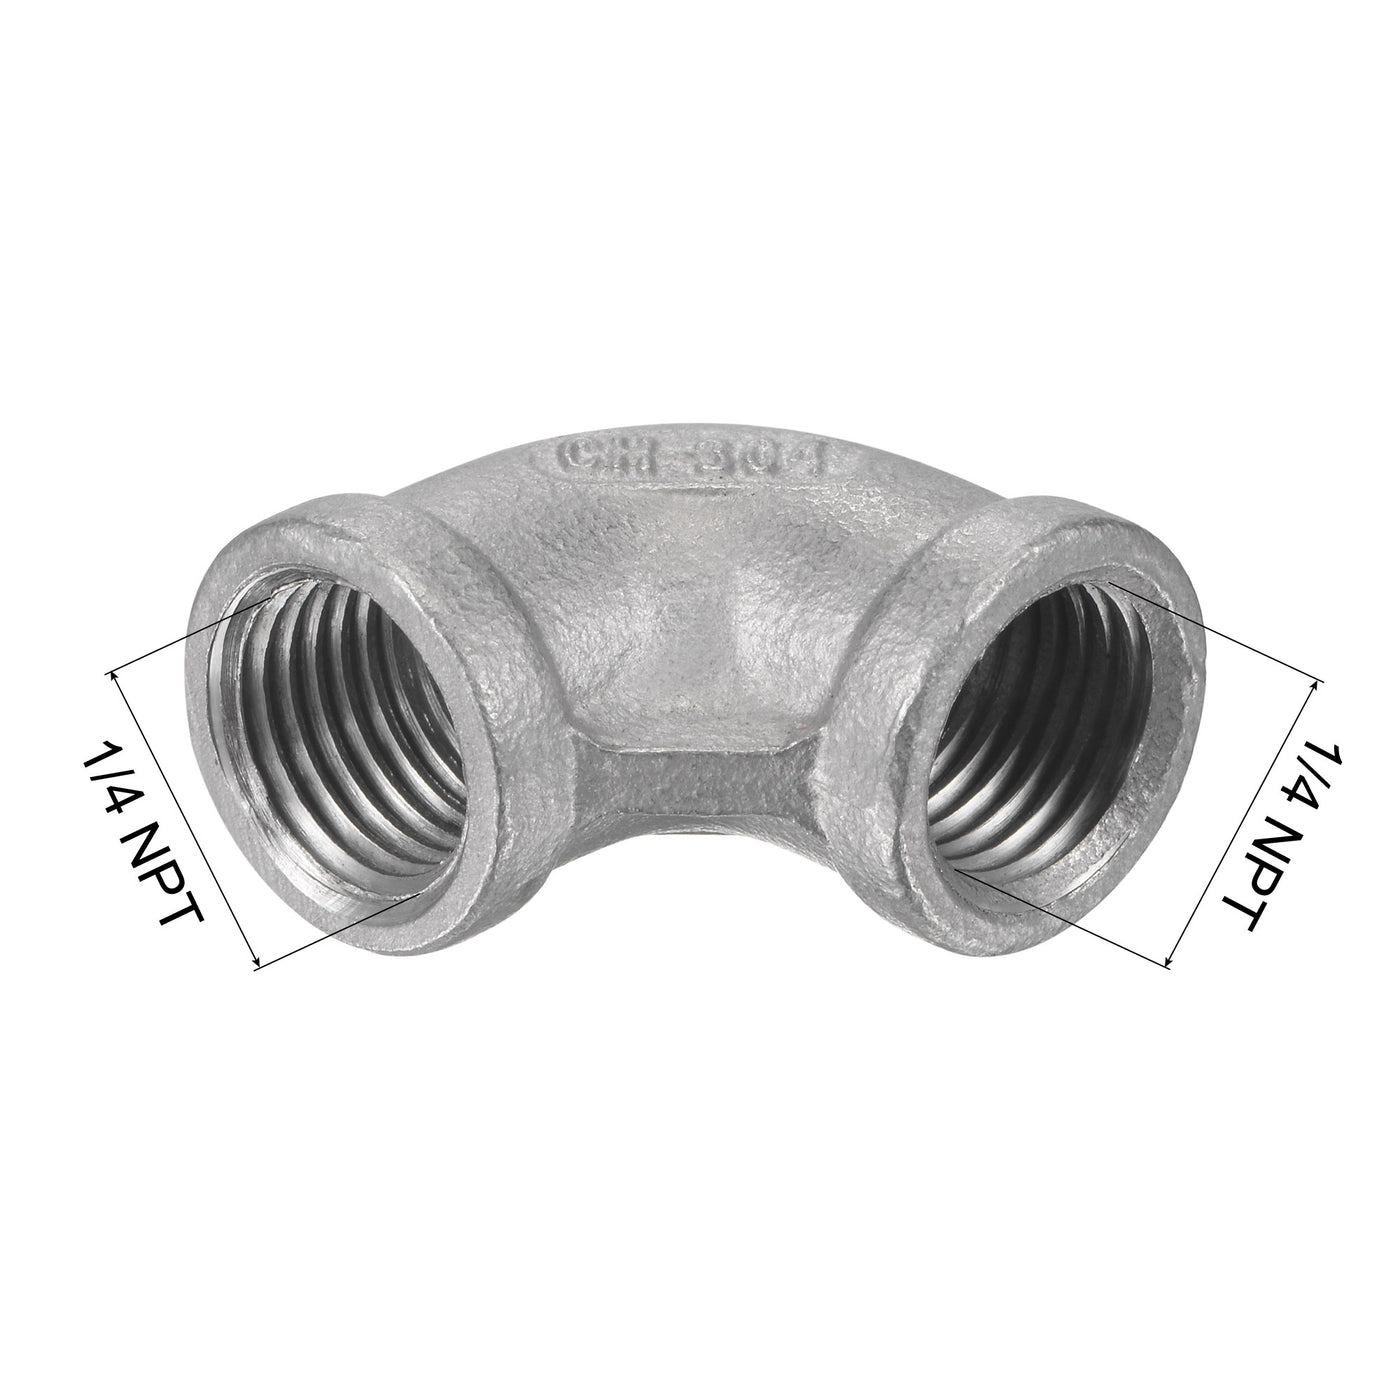 Uxcell Uxcell Pipe Fitting Elbow 1/2 NPT Female Thread Hose Connector Adapter, 304 Stainless Steel Pack of 2